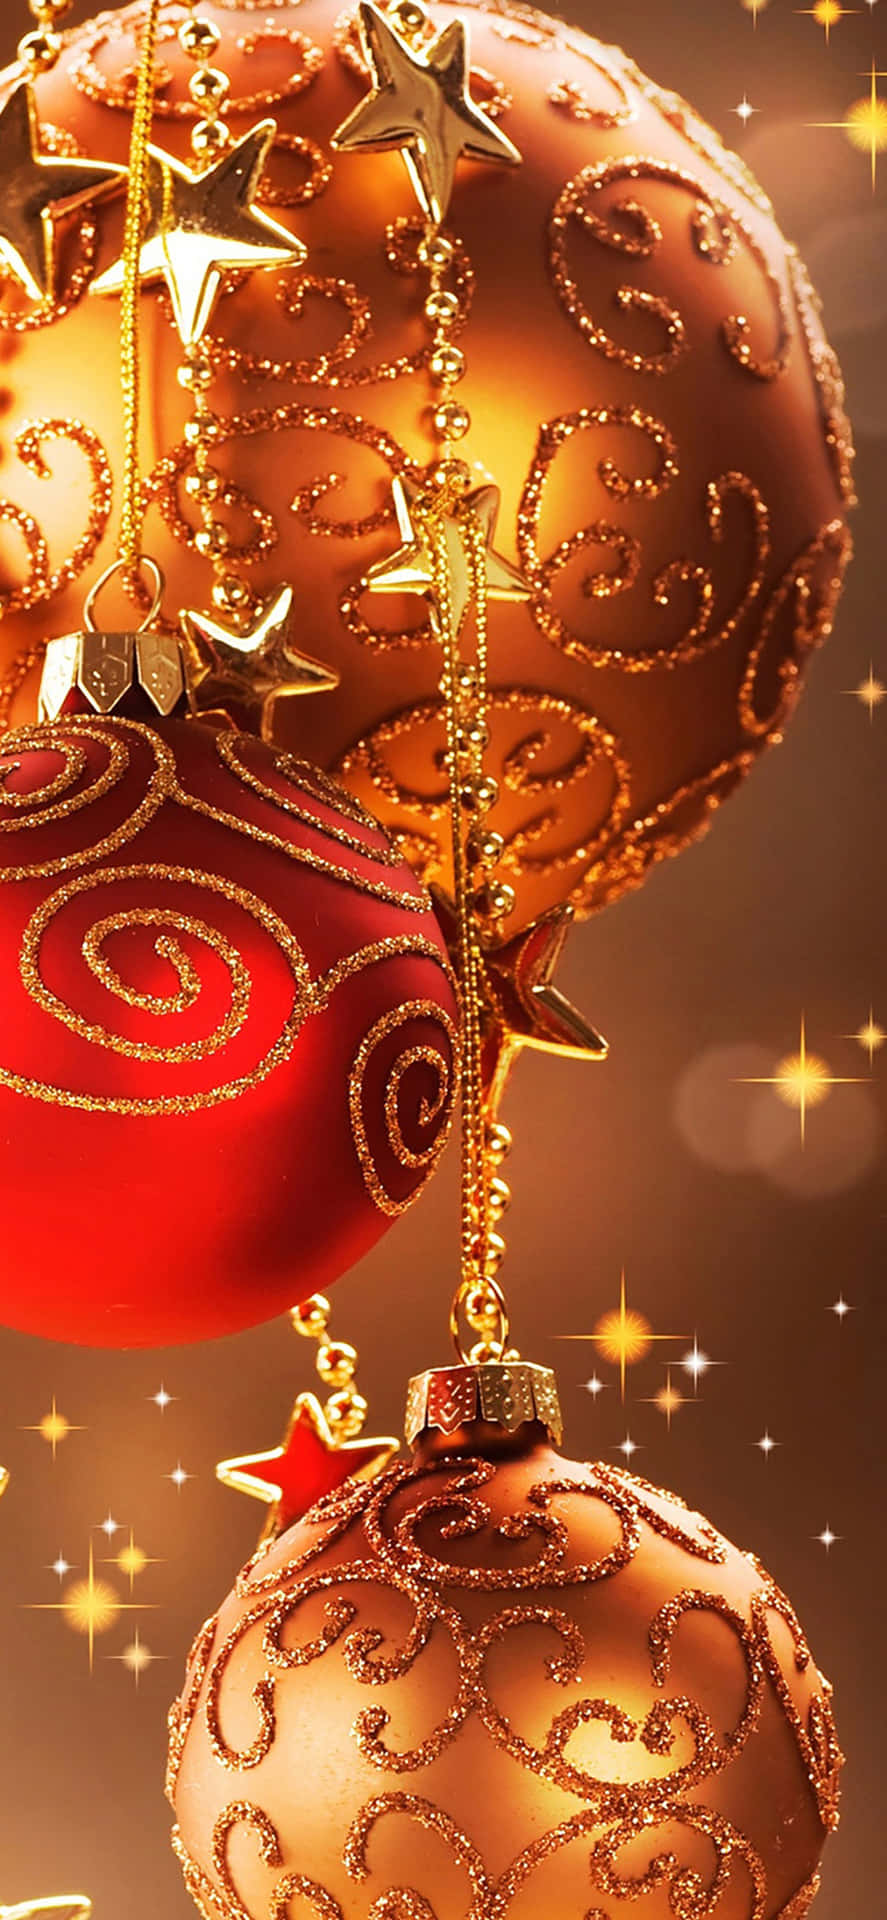 Christmas Ornaments With Stars And Gold Ornaments Wallpaper